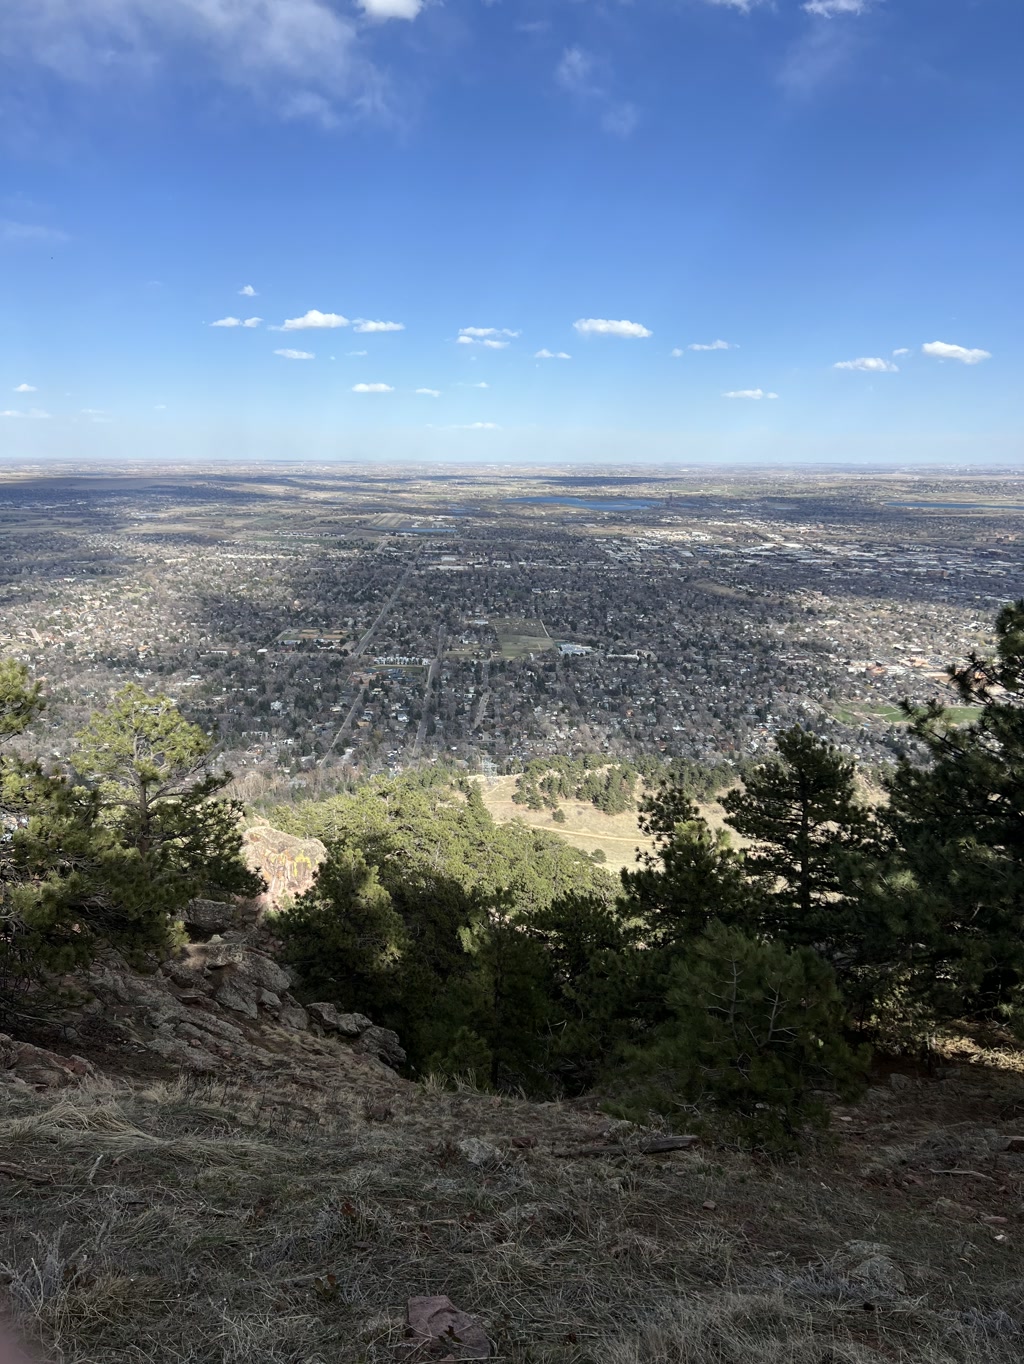 A panoramic view from a high vantage point overlooking a sprawling city situated on a plain with a backdrop of a clear blue sky. The landscape includes patches of greenery, multiple residential and commercial areas with recognizable road networks. In the foreground, you can see rocky terrain with dry grasses and a few coniferous trees typical of a mountaintop or highland area.